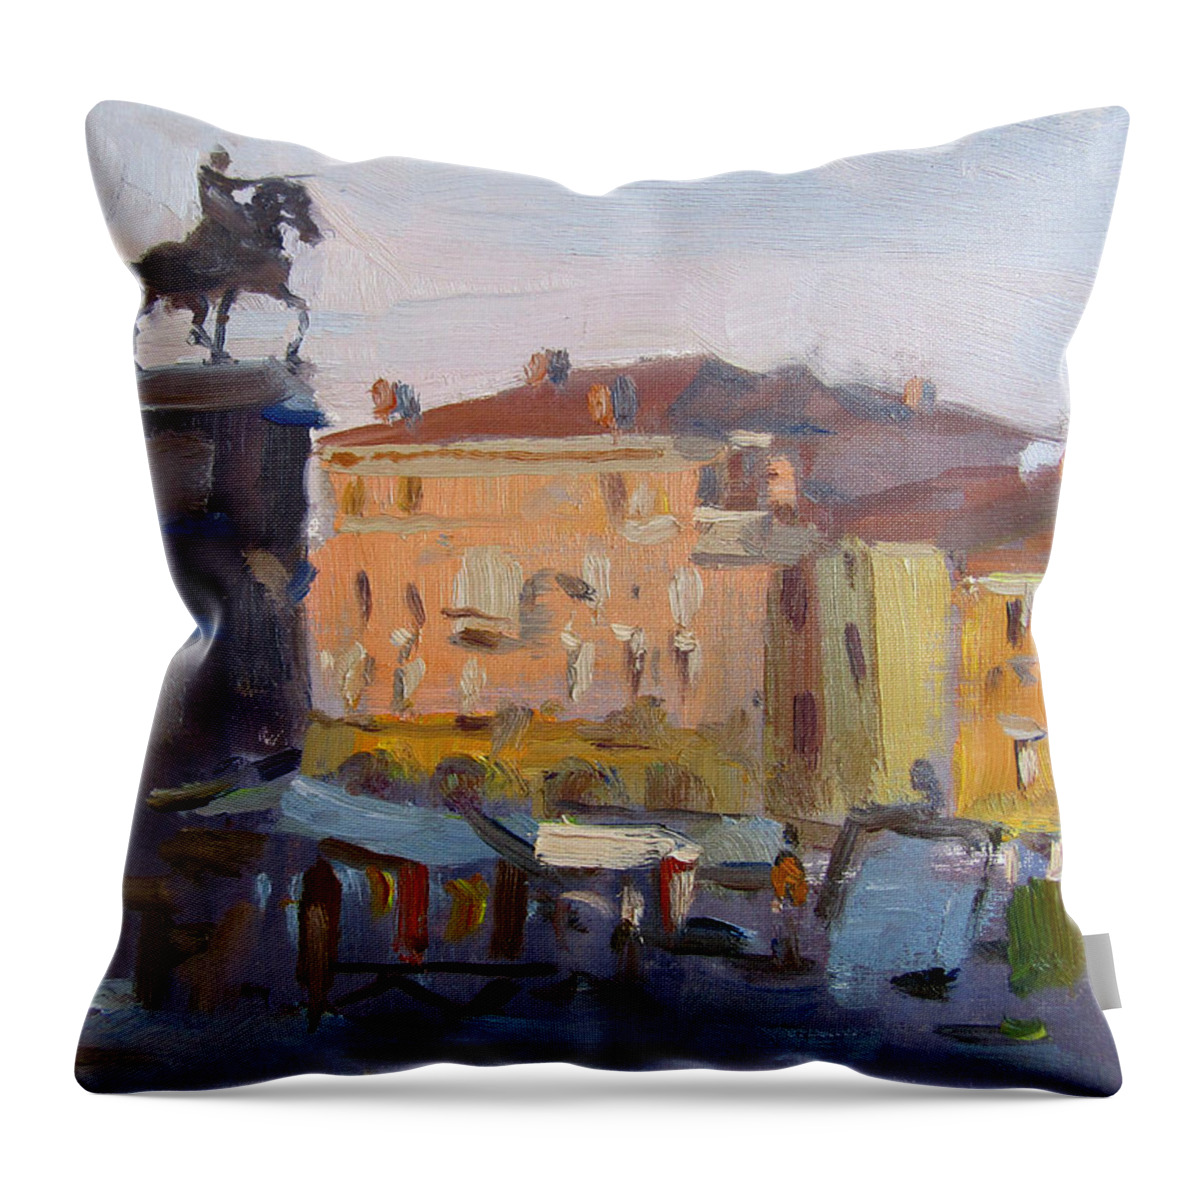 Padua Italy Throw Pillow featuring the painting Padua Italy by Ylli Haruni